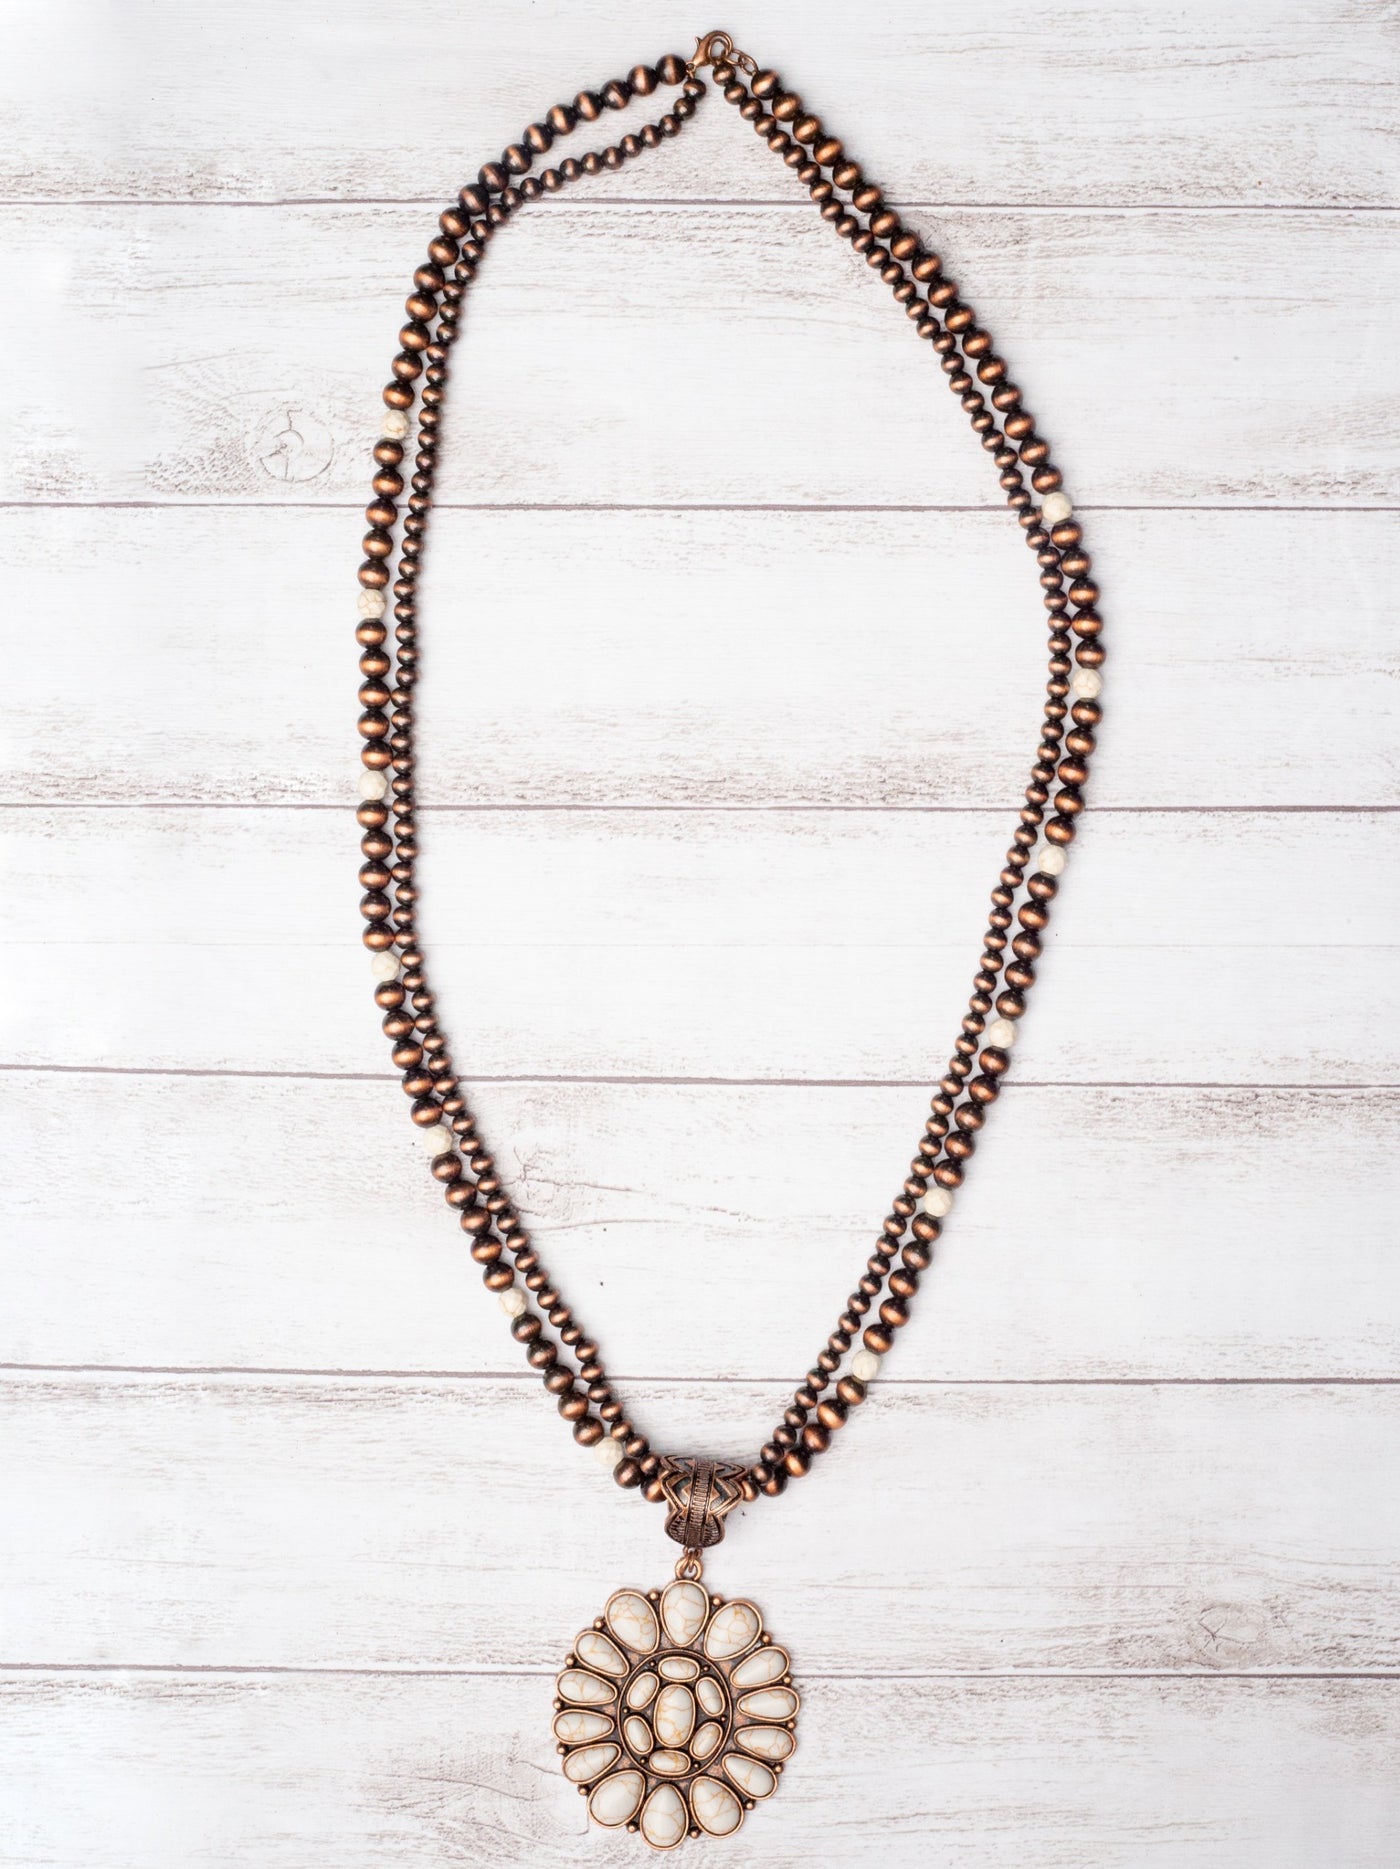 BUCKLE UP BUTTERCUP CREAM HOWLITE FLORAL CONCHO ON COPPER NAVAJO PEARLS NECKLACE